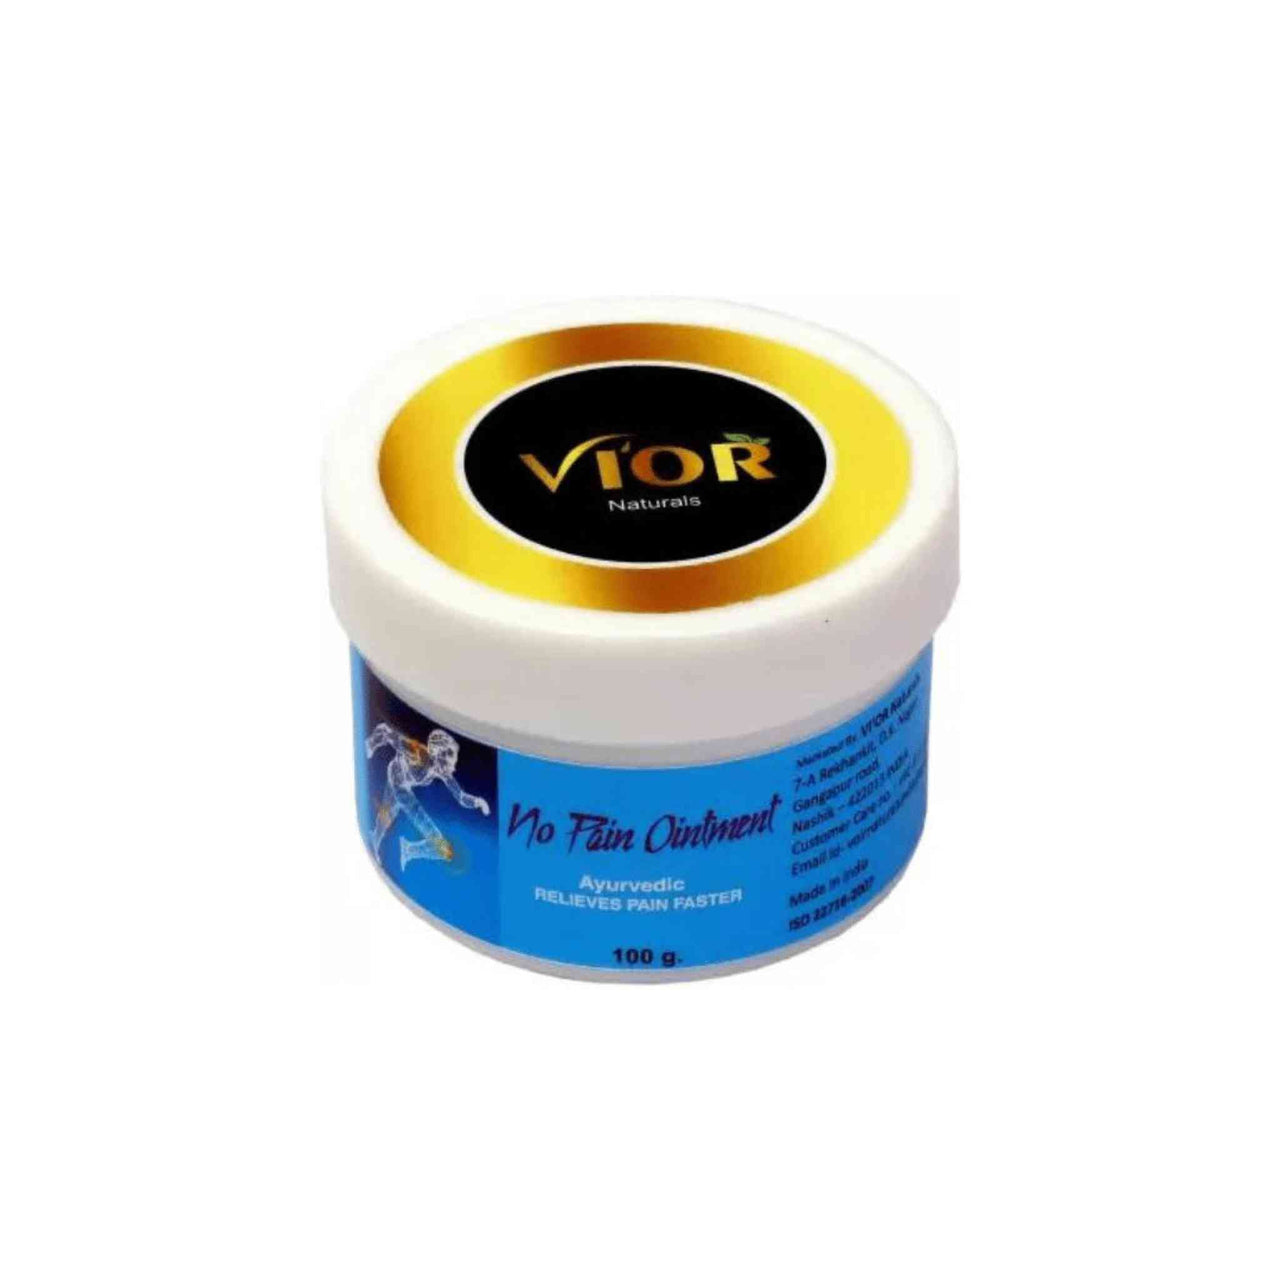 Vior Naturals - No Pain Oinment | Ayurvedic Muscle Relaxant